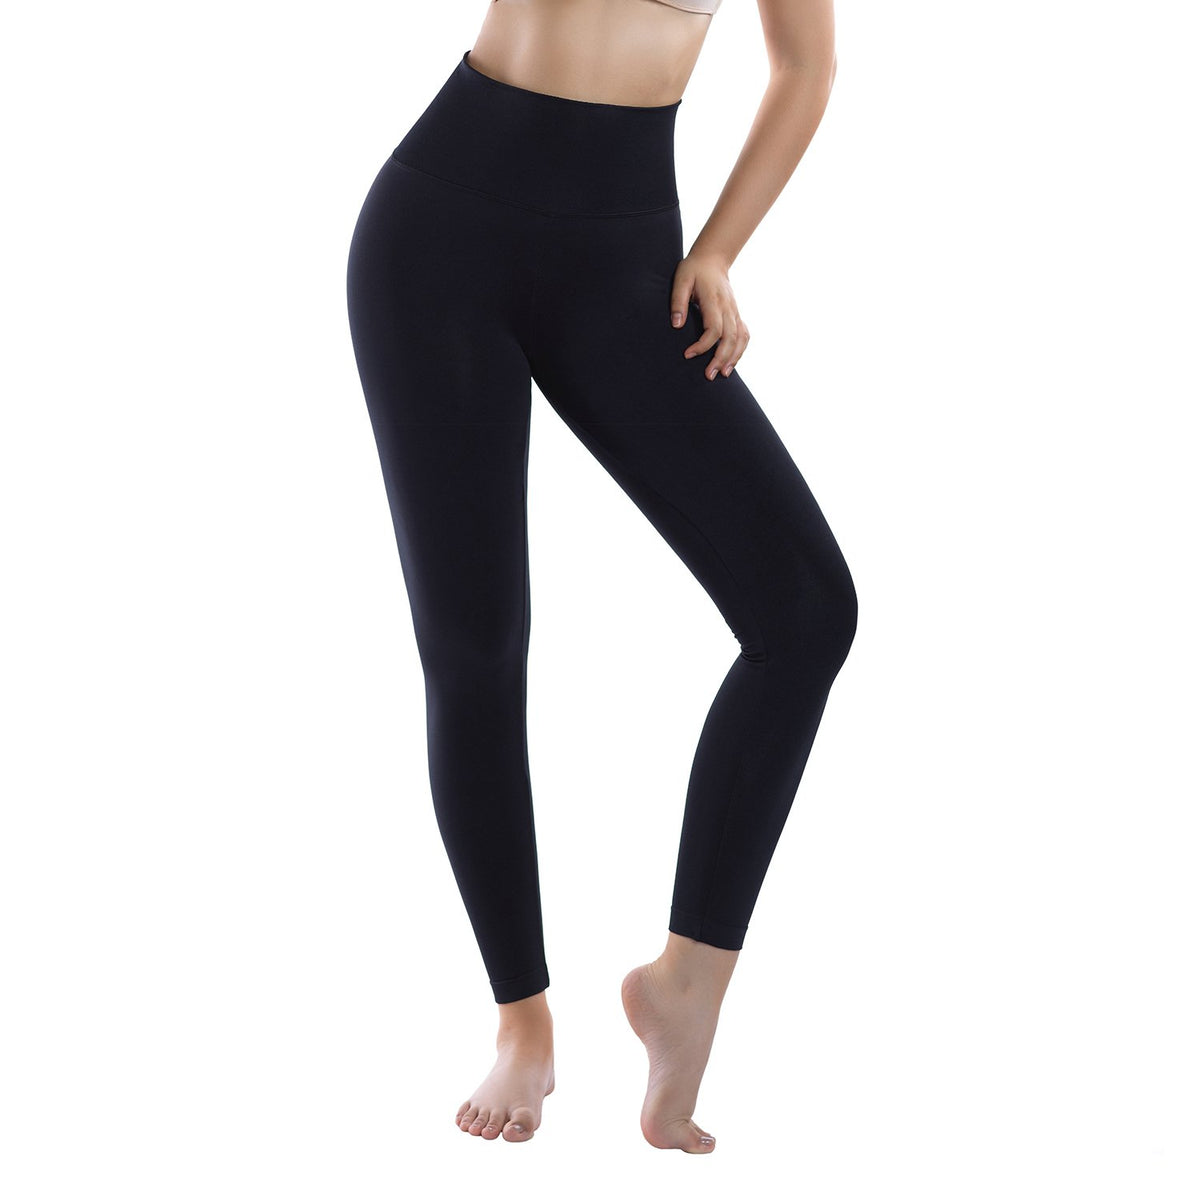 NOZEM Compltion Highly Elastic Body Shaping Leggings, Leggings for Women,  Compltion Tummy Control Body Shaping Leggings (Black,M) at  Women's  Clothing store